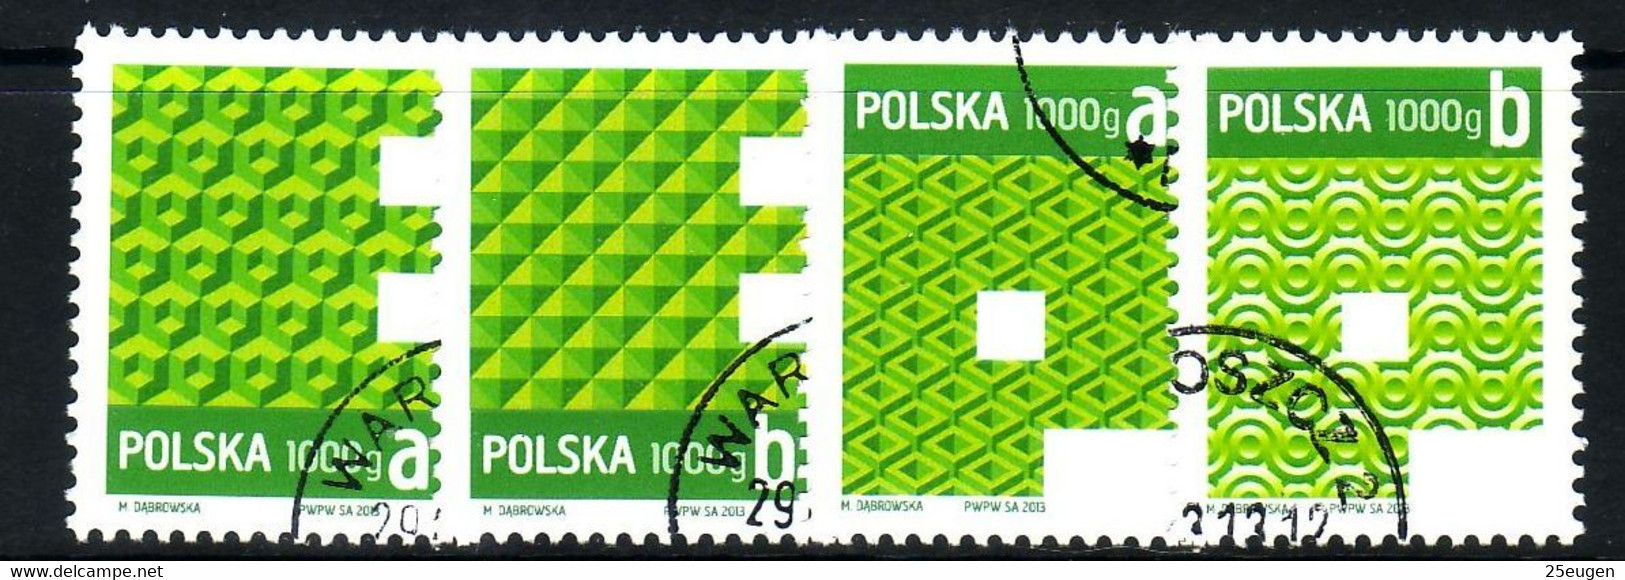 POLAND 2013 Michel No 4599-02 Used - Used Stamps